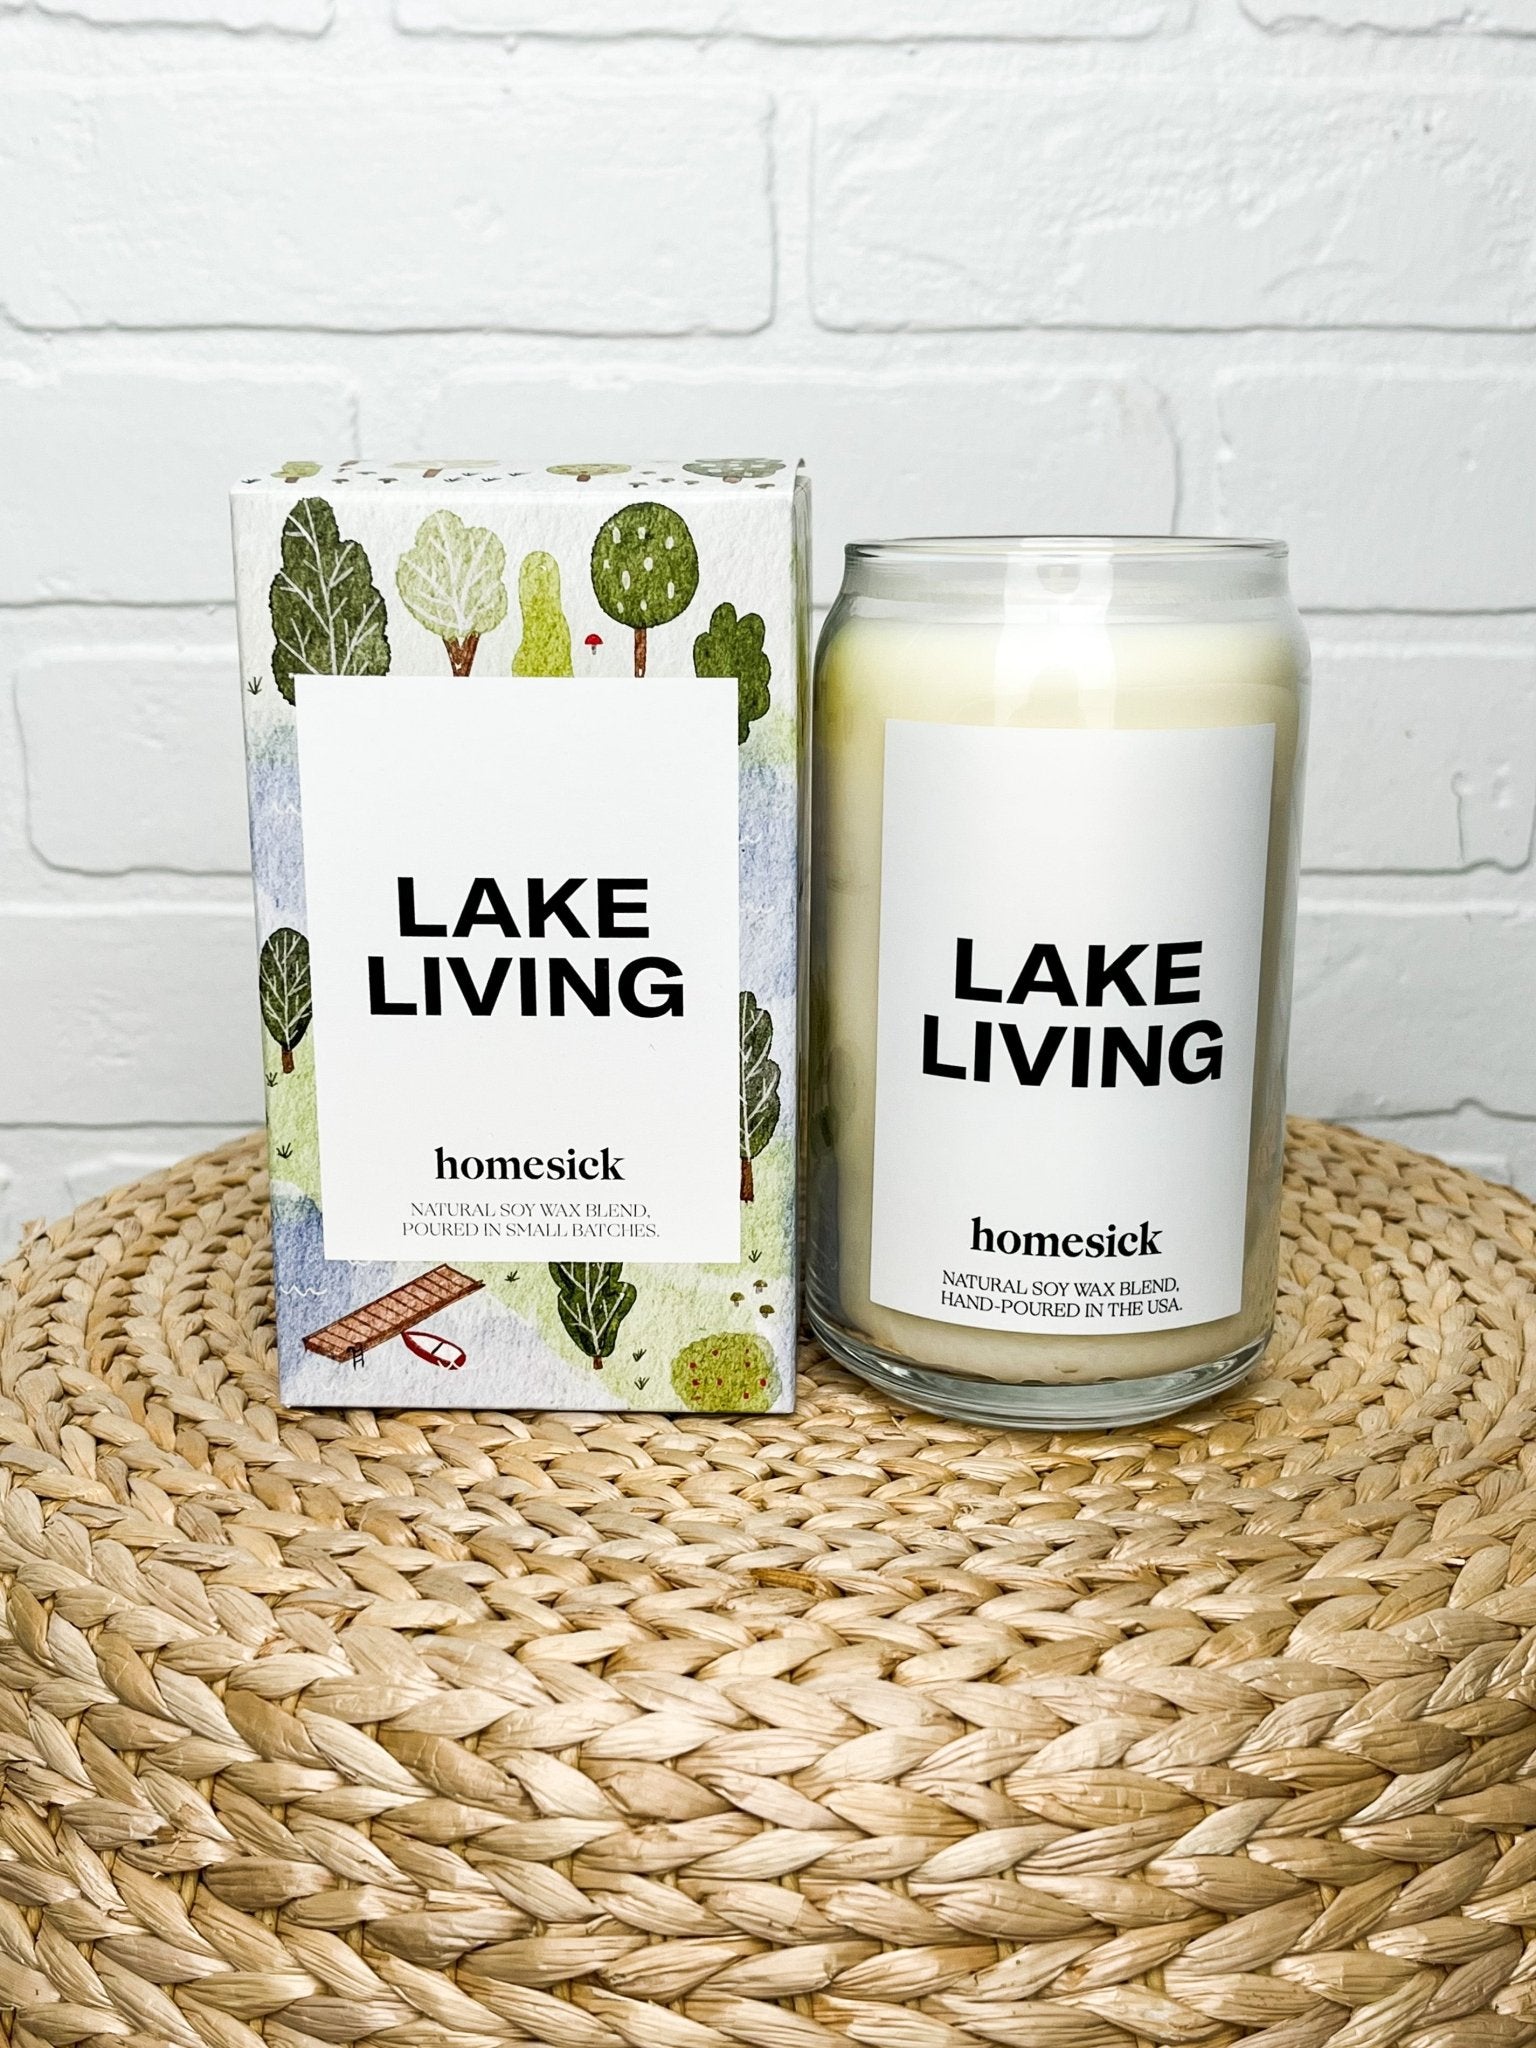 Homesick Lake Living candle - Trendy Candles at Lush Fashion Lounge Boutique in Oklahoma City